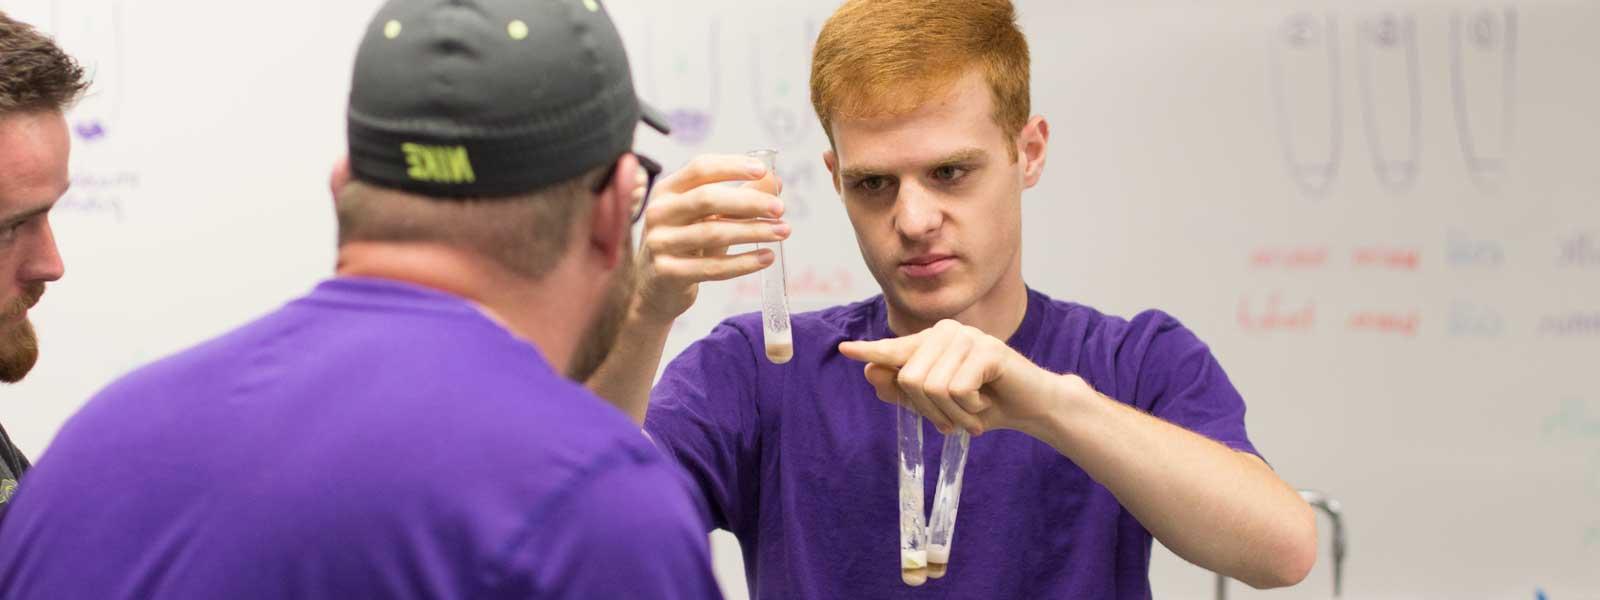 group of students concentrate on chemistry experiment